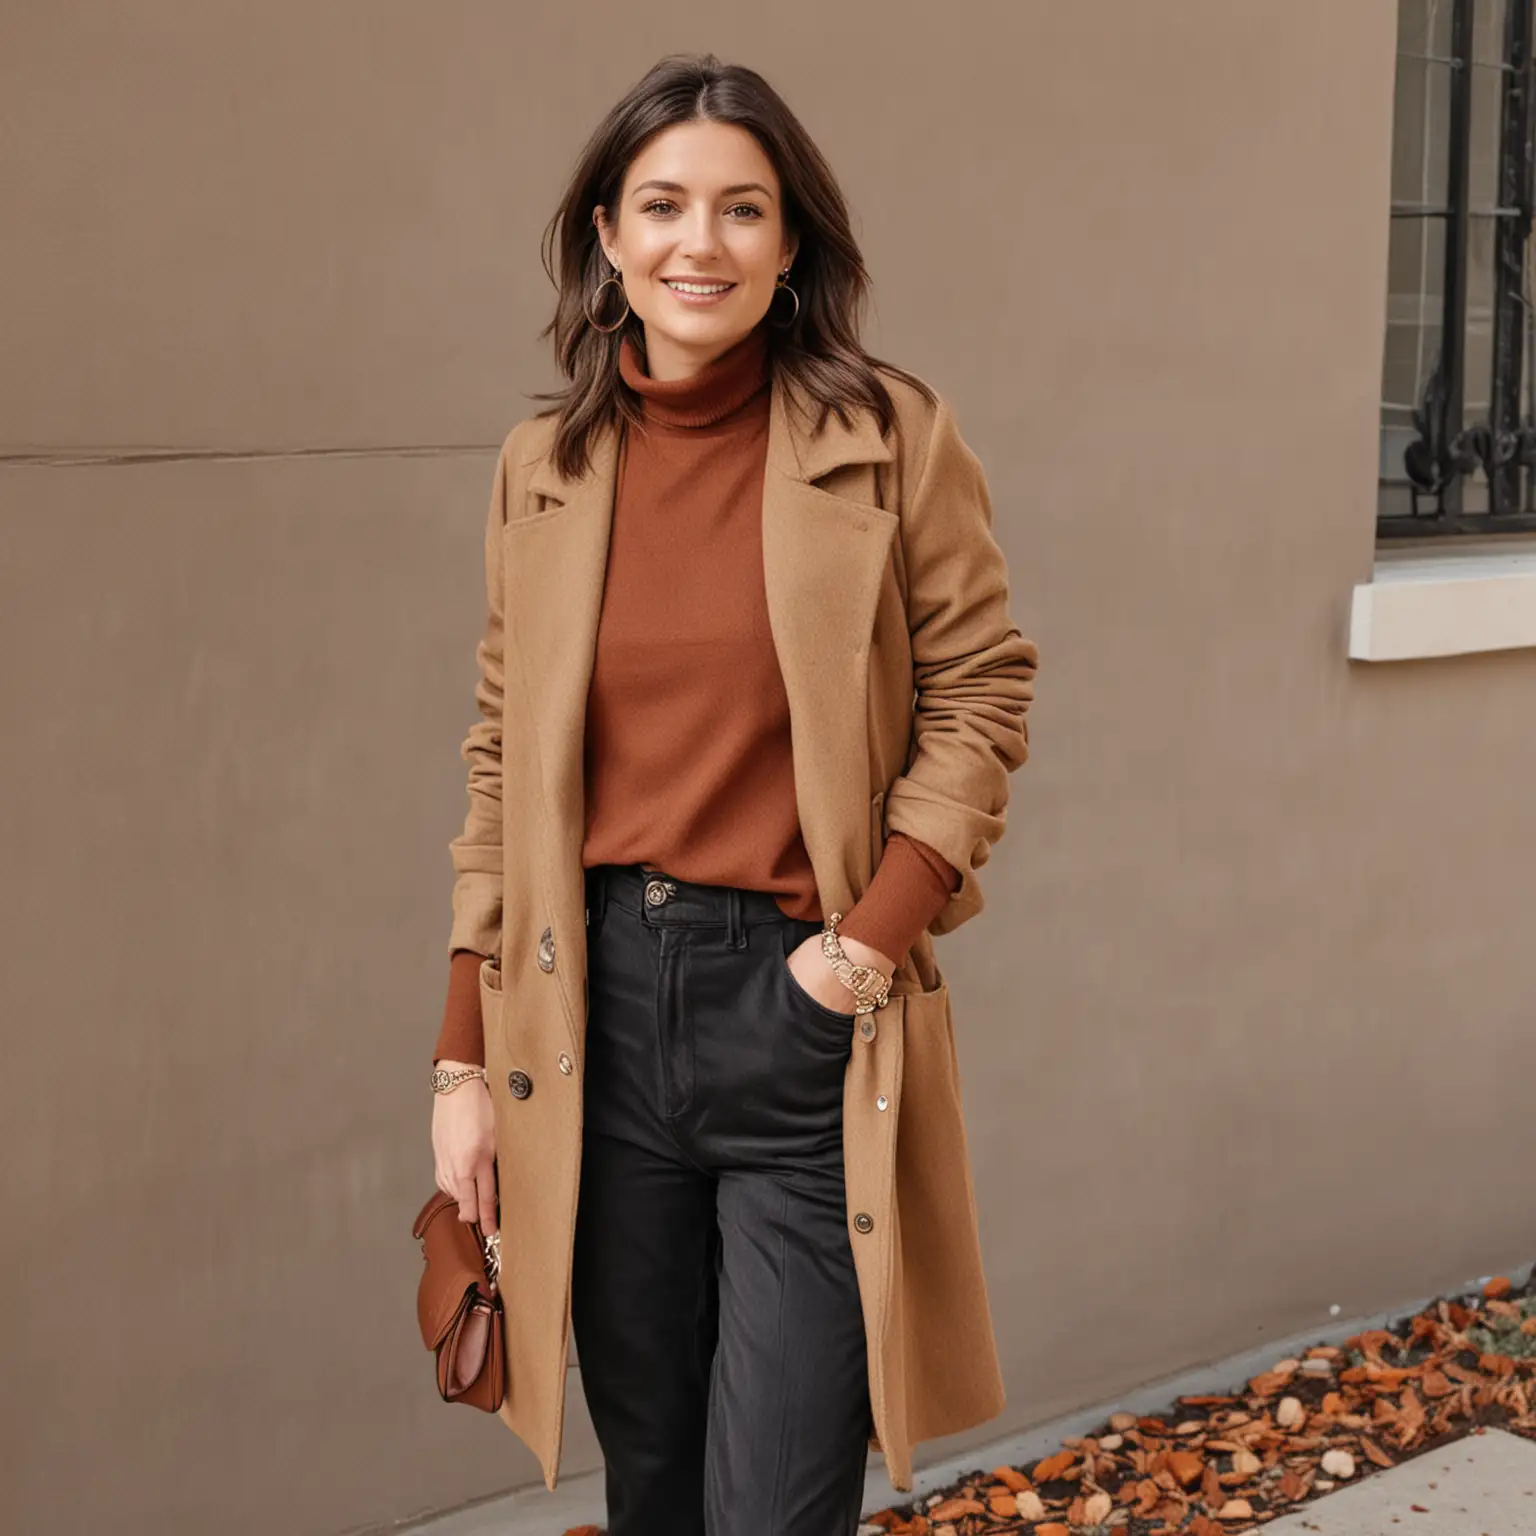 30-year old woman in a chic trendy fall outfit